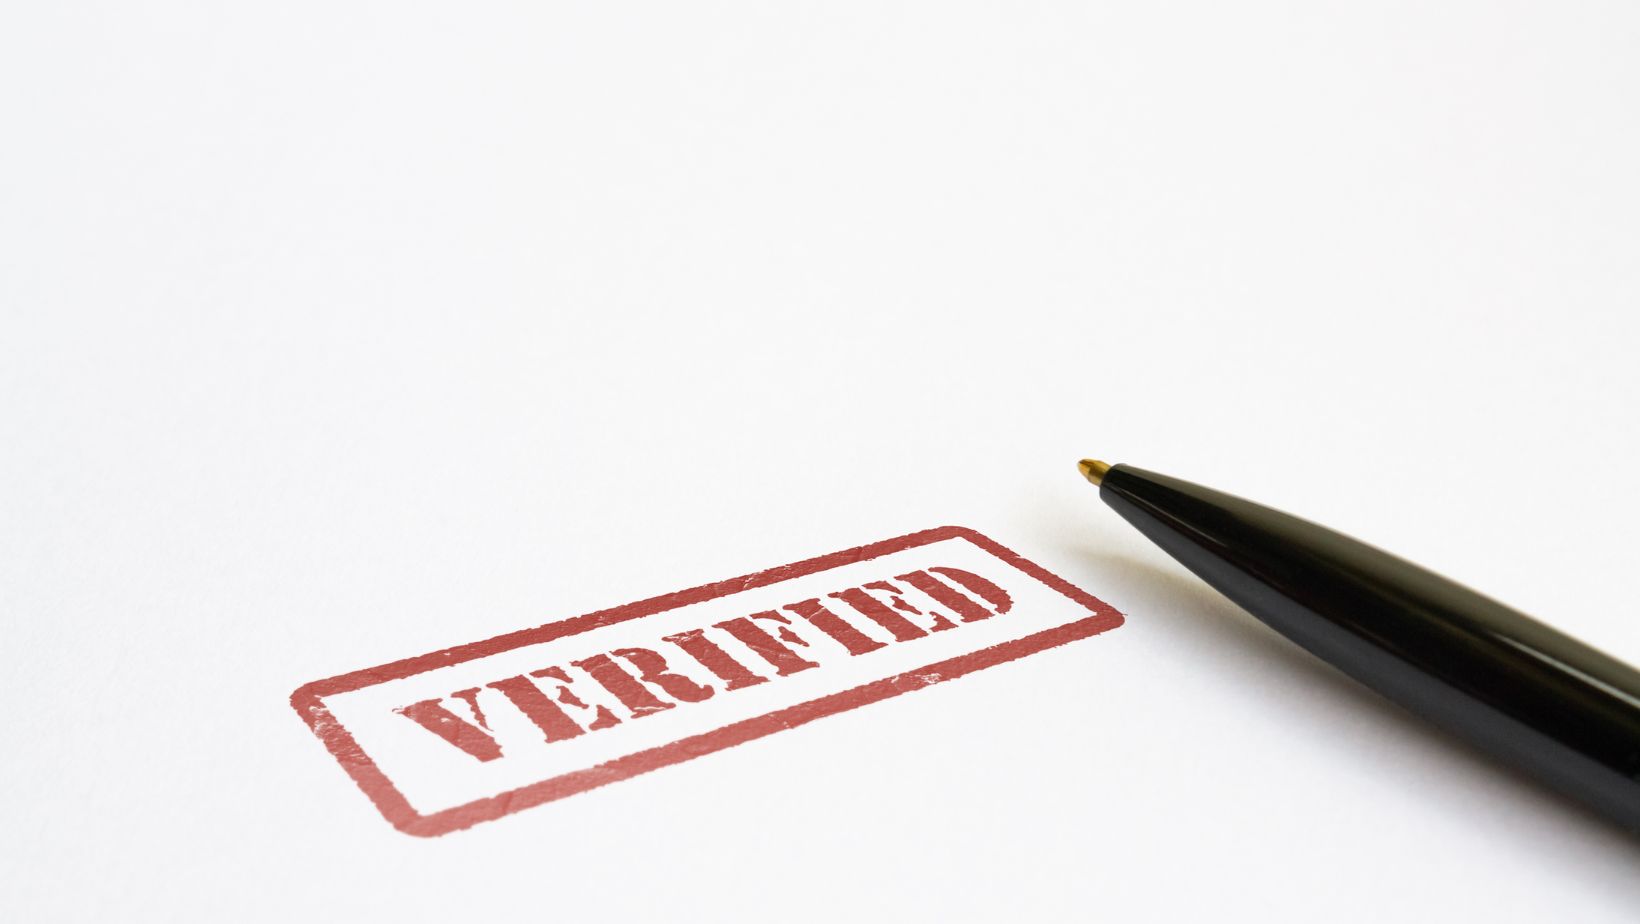 all of the following are steps in verifying insurance except